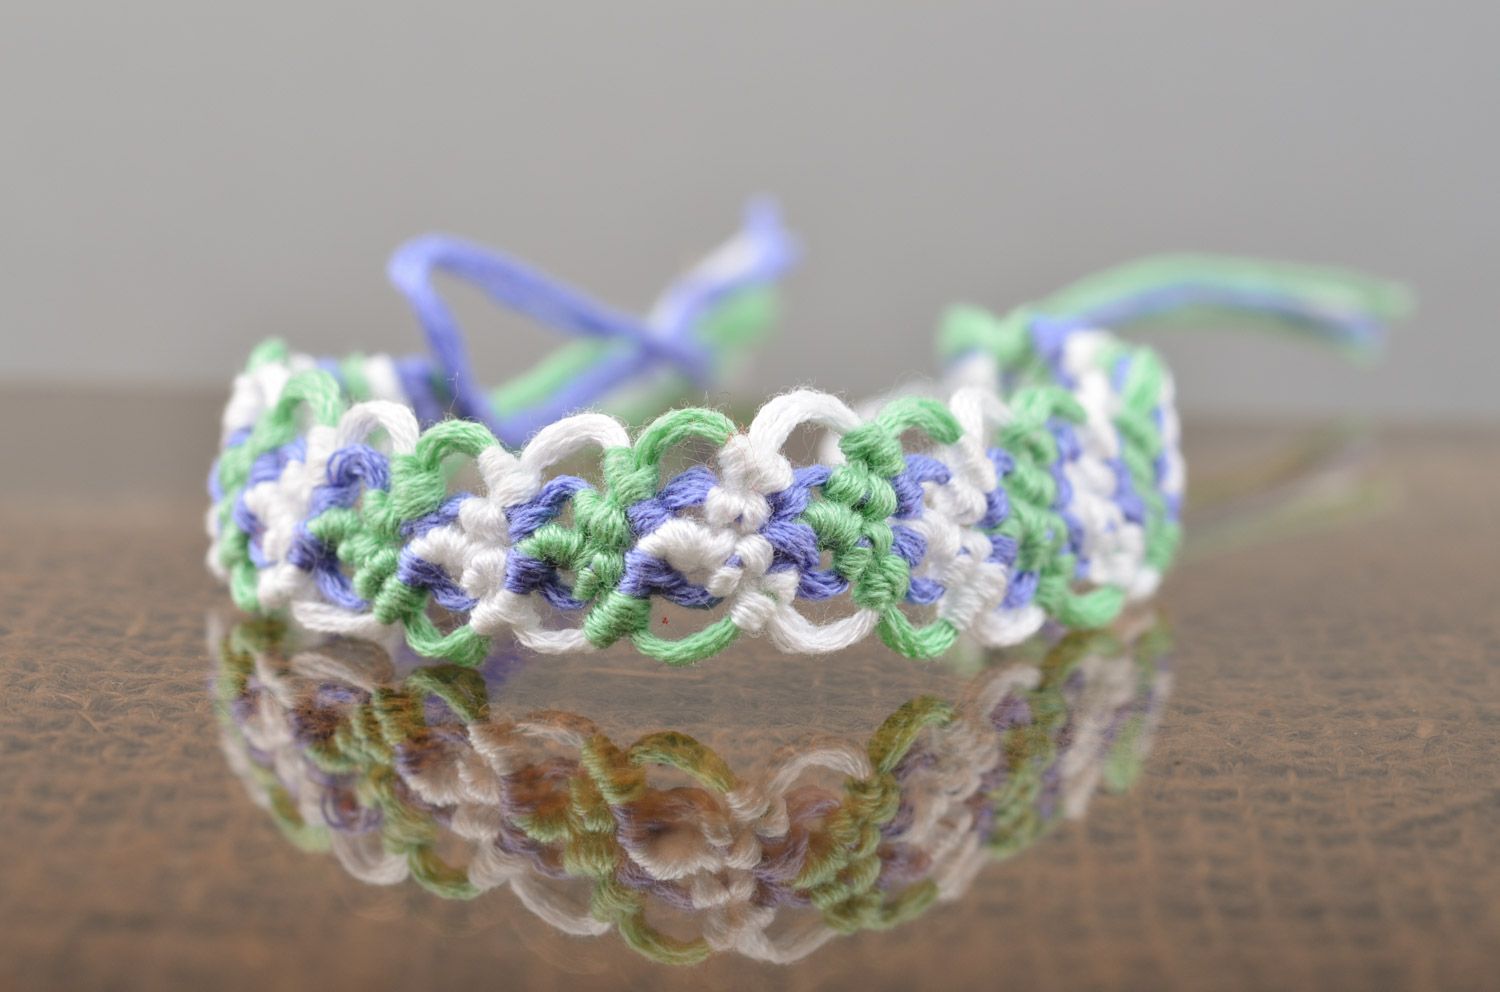 Thin handmade friendship wrist bracelet woven of embroidery floss in tender colors photo 1